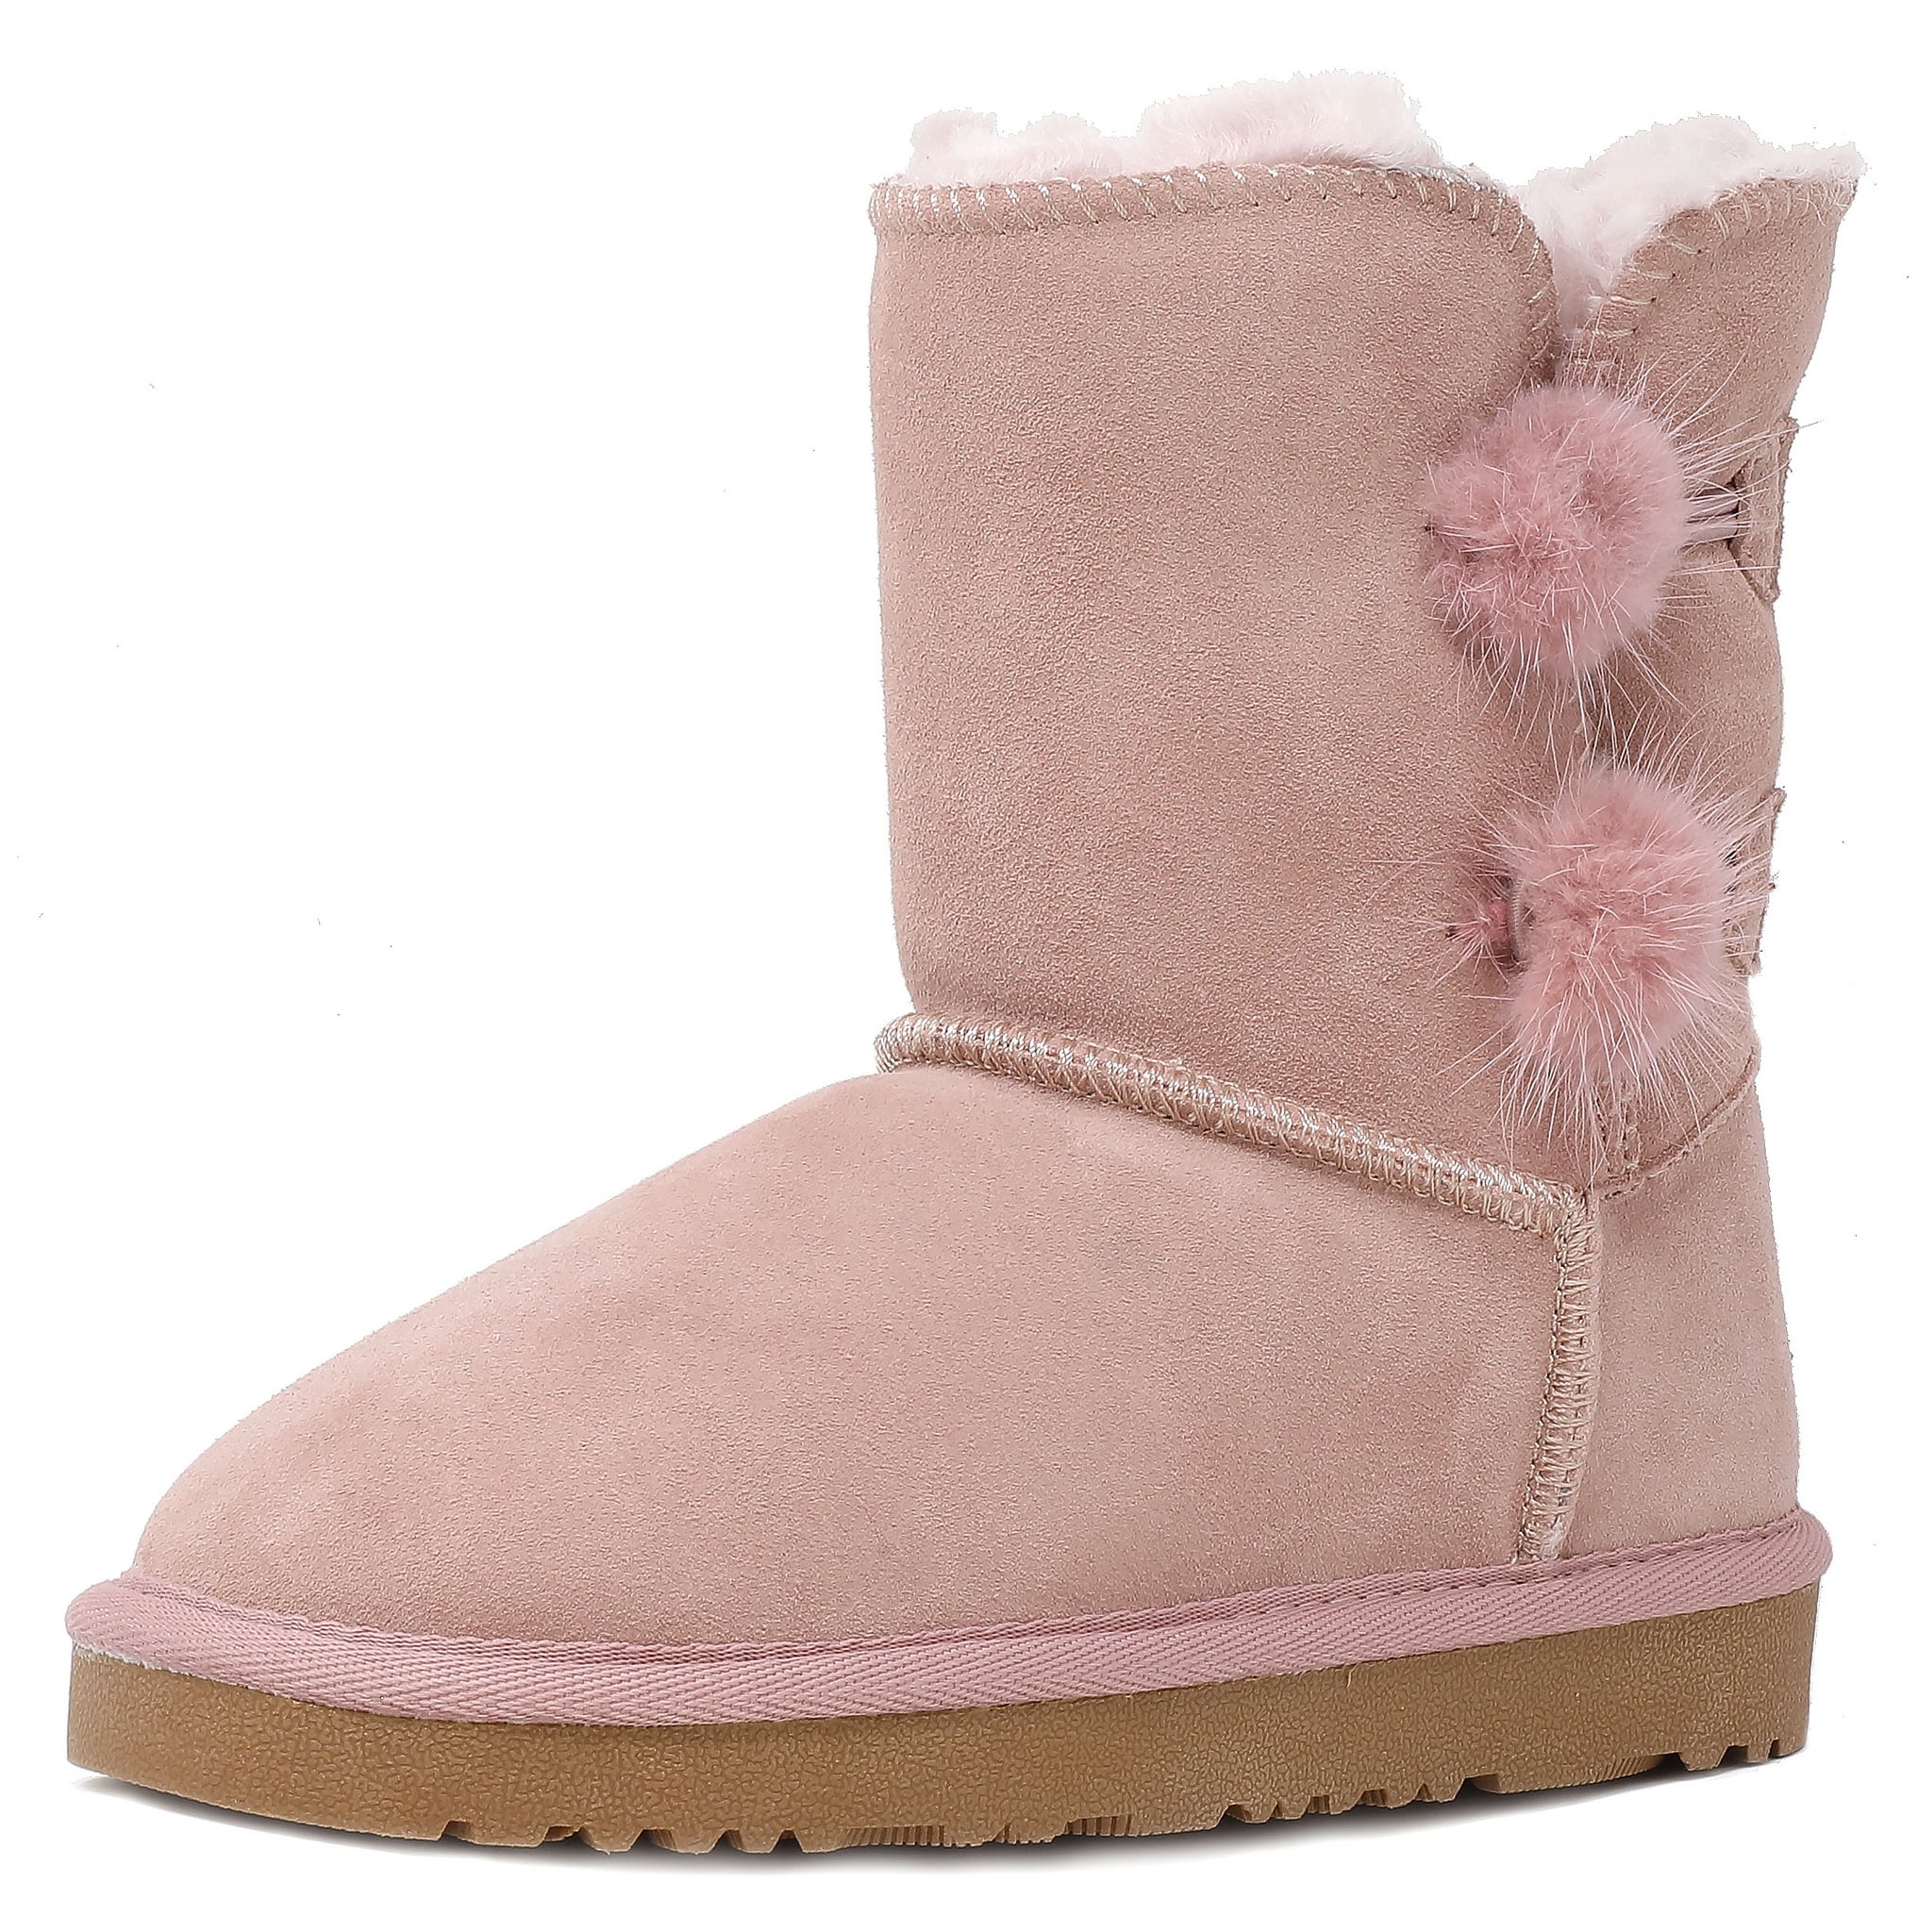 Girls Kids Snow Boots Sheepskin Winter Faux Fur Lined Ankle Boots Ski Boots 